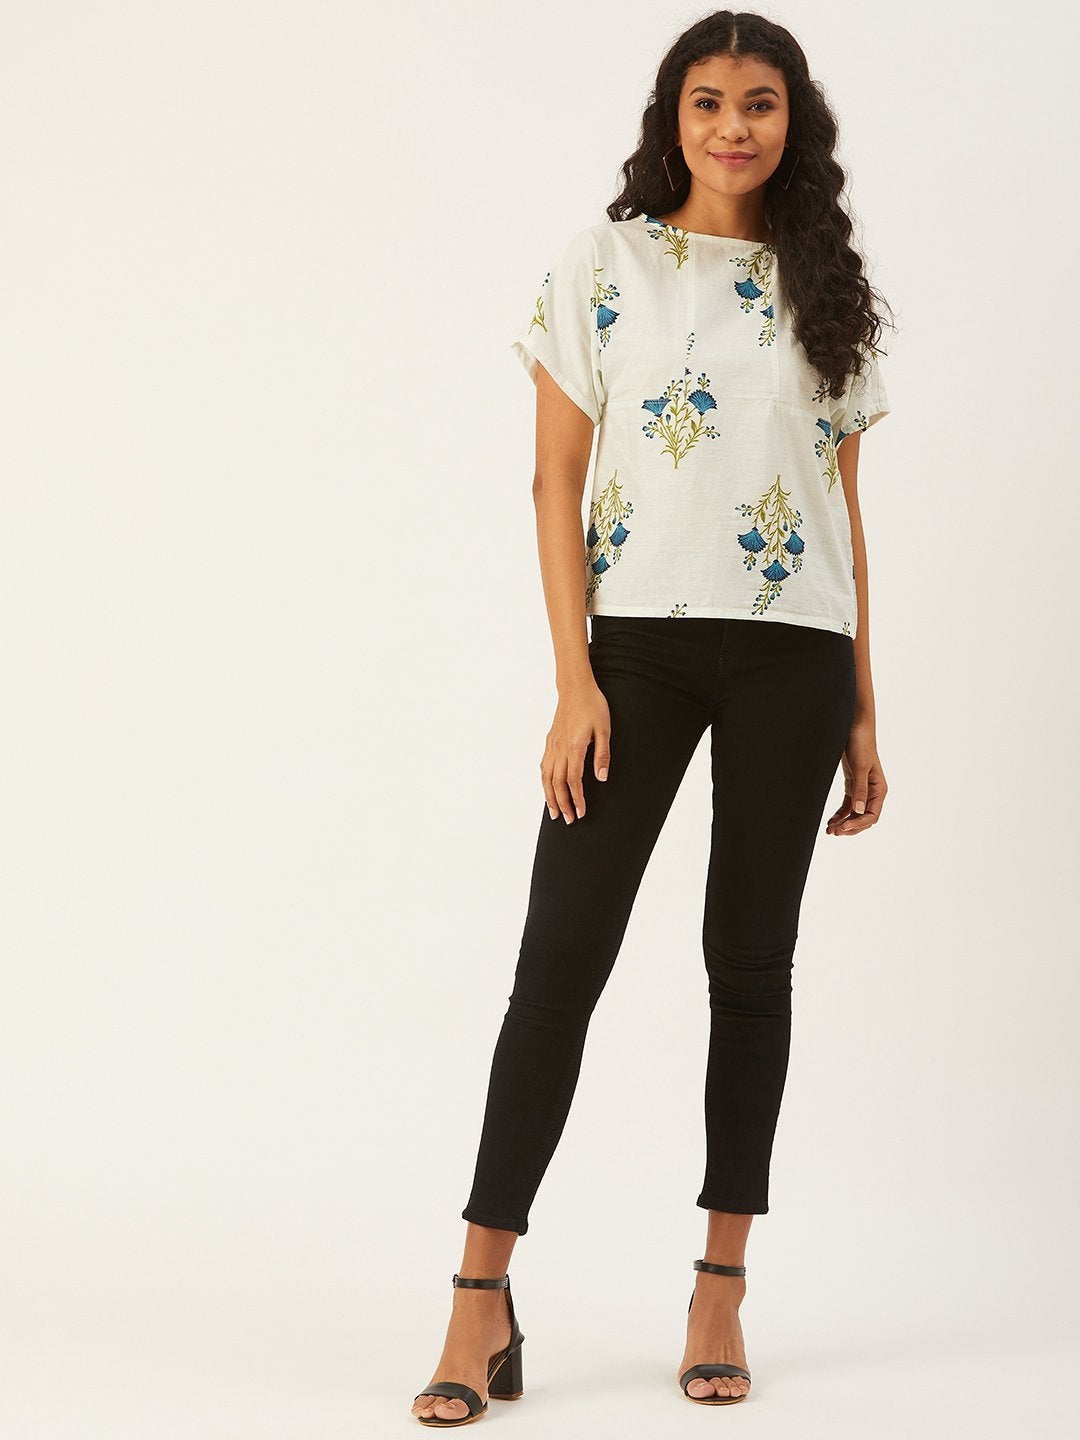 Women's White Top With Blue Floral Print - InWeave